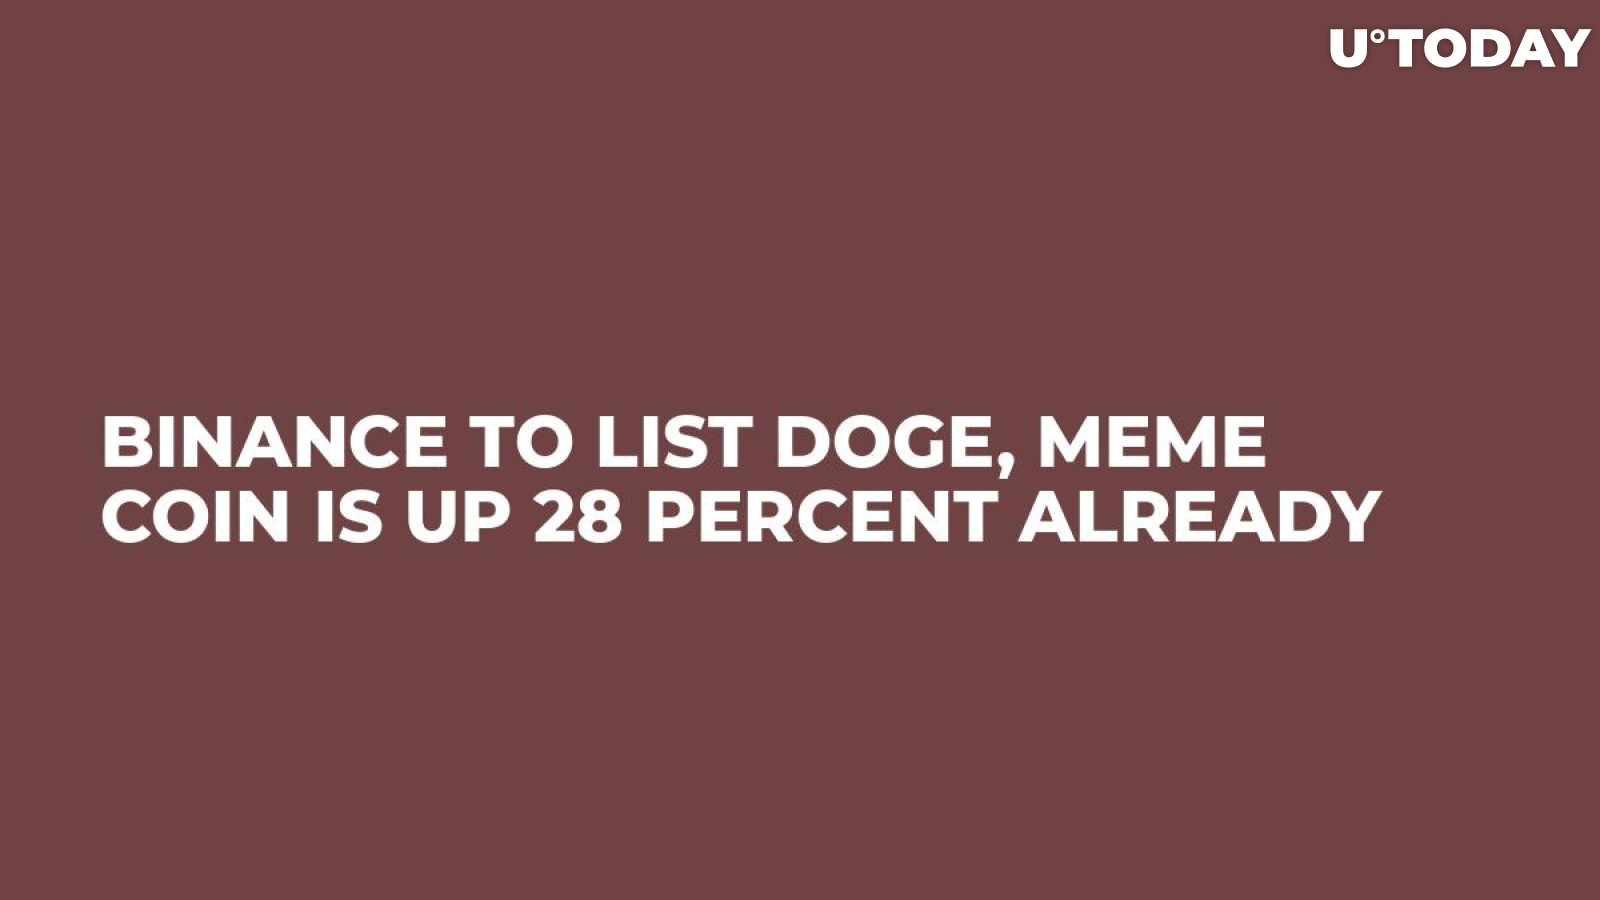 Binance to List DOGE, Meme Coin is Up 28 Percent Already